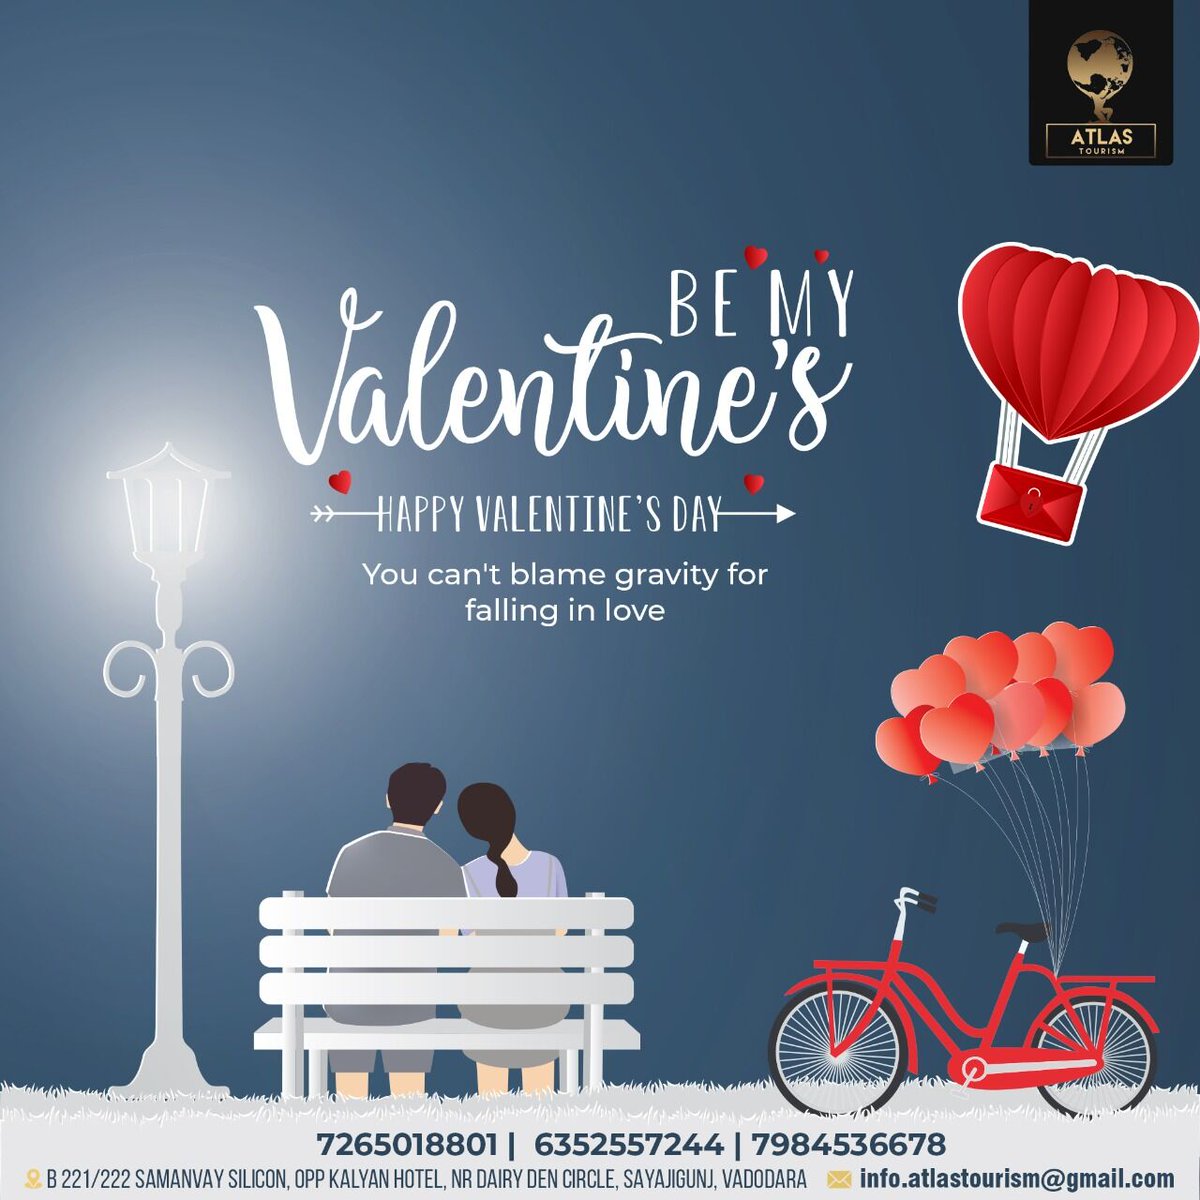 Love does not have boundaries; let the love spread beyond the borders.
𝐇𝐚𝐩𝐩𝐲 𝐕𝐚𝐥𝐞𝐧𝐭𝐢𝐧𝐞'𝐬 𝐃𝐚𝐲❤️🌹

#atlastourism #valentinesday #valentineday #valentinegift #love #celebrating #couplegoals #forever #feelings #happyvalentinesday #coupleday